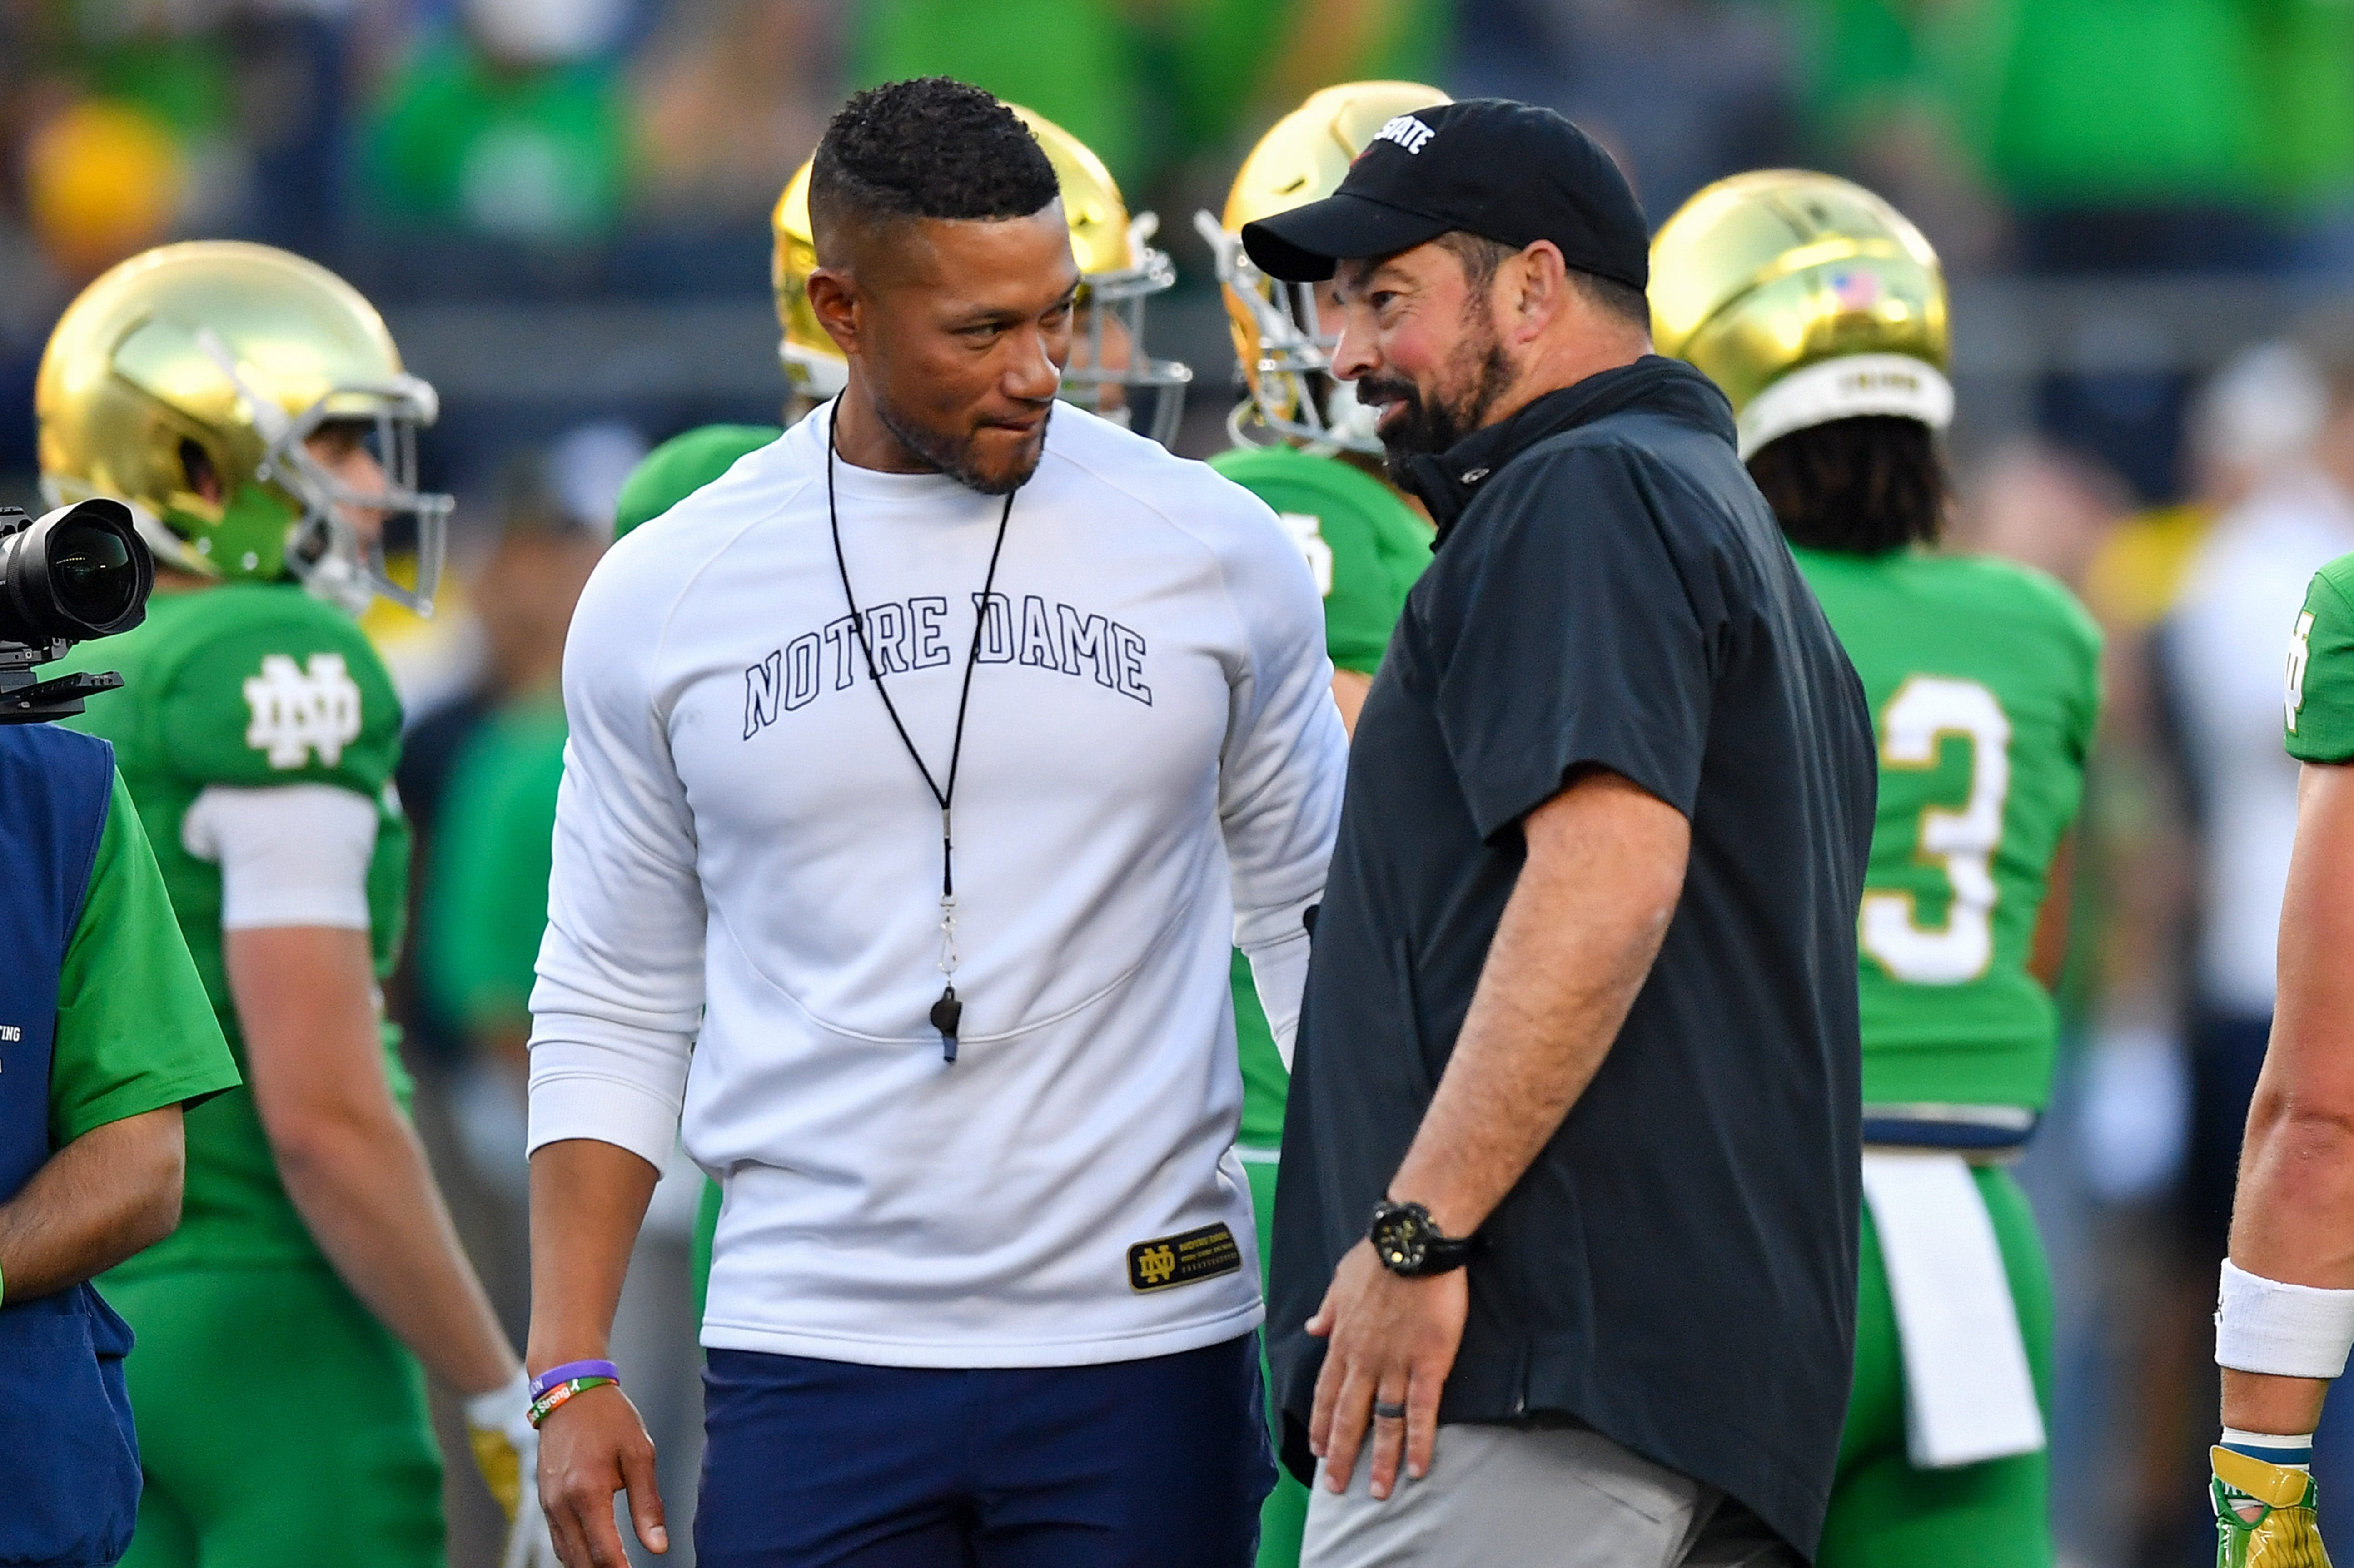 Heading into fall camp, Notre Dame football focuses on solutions before opener at Texas A&M